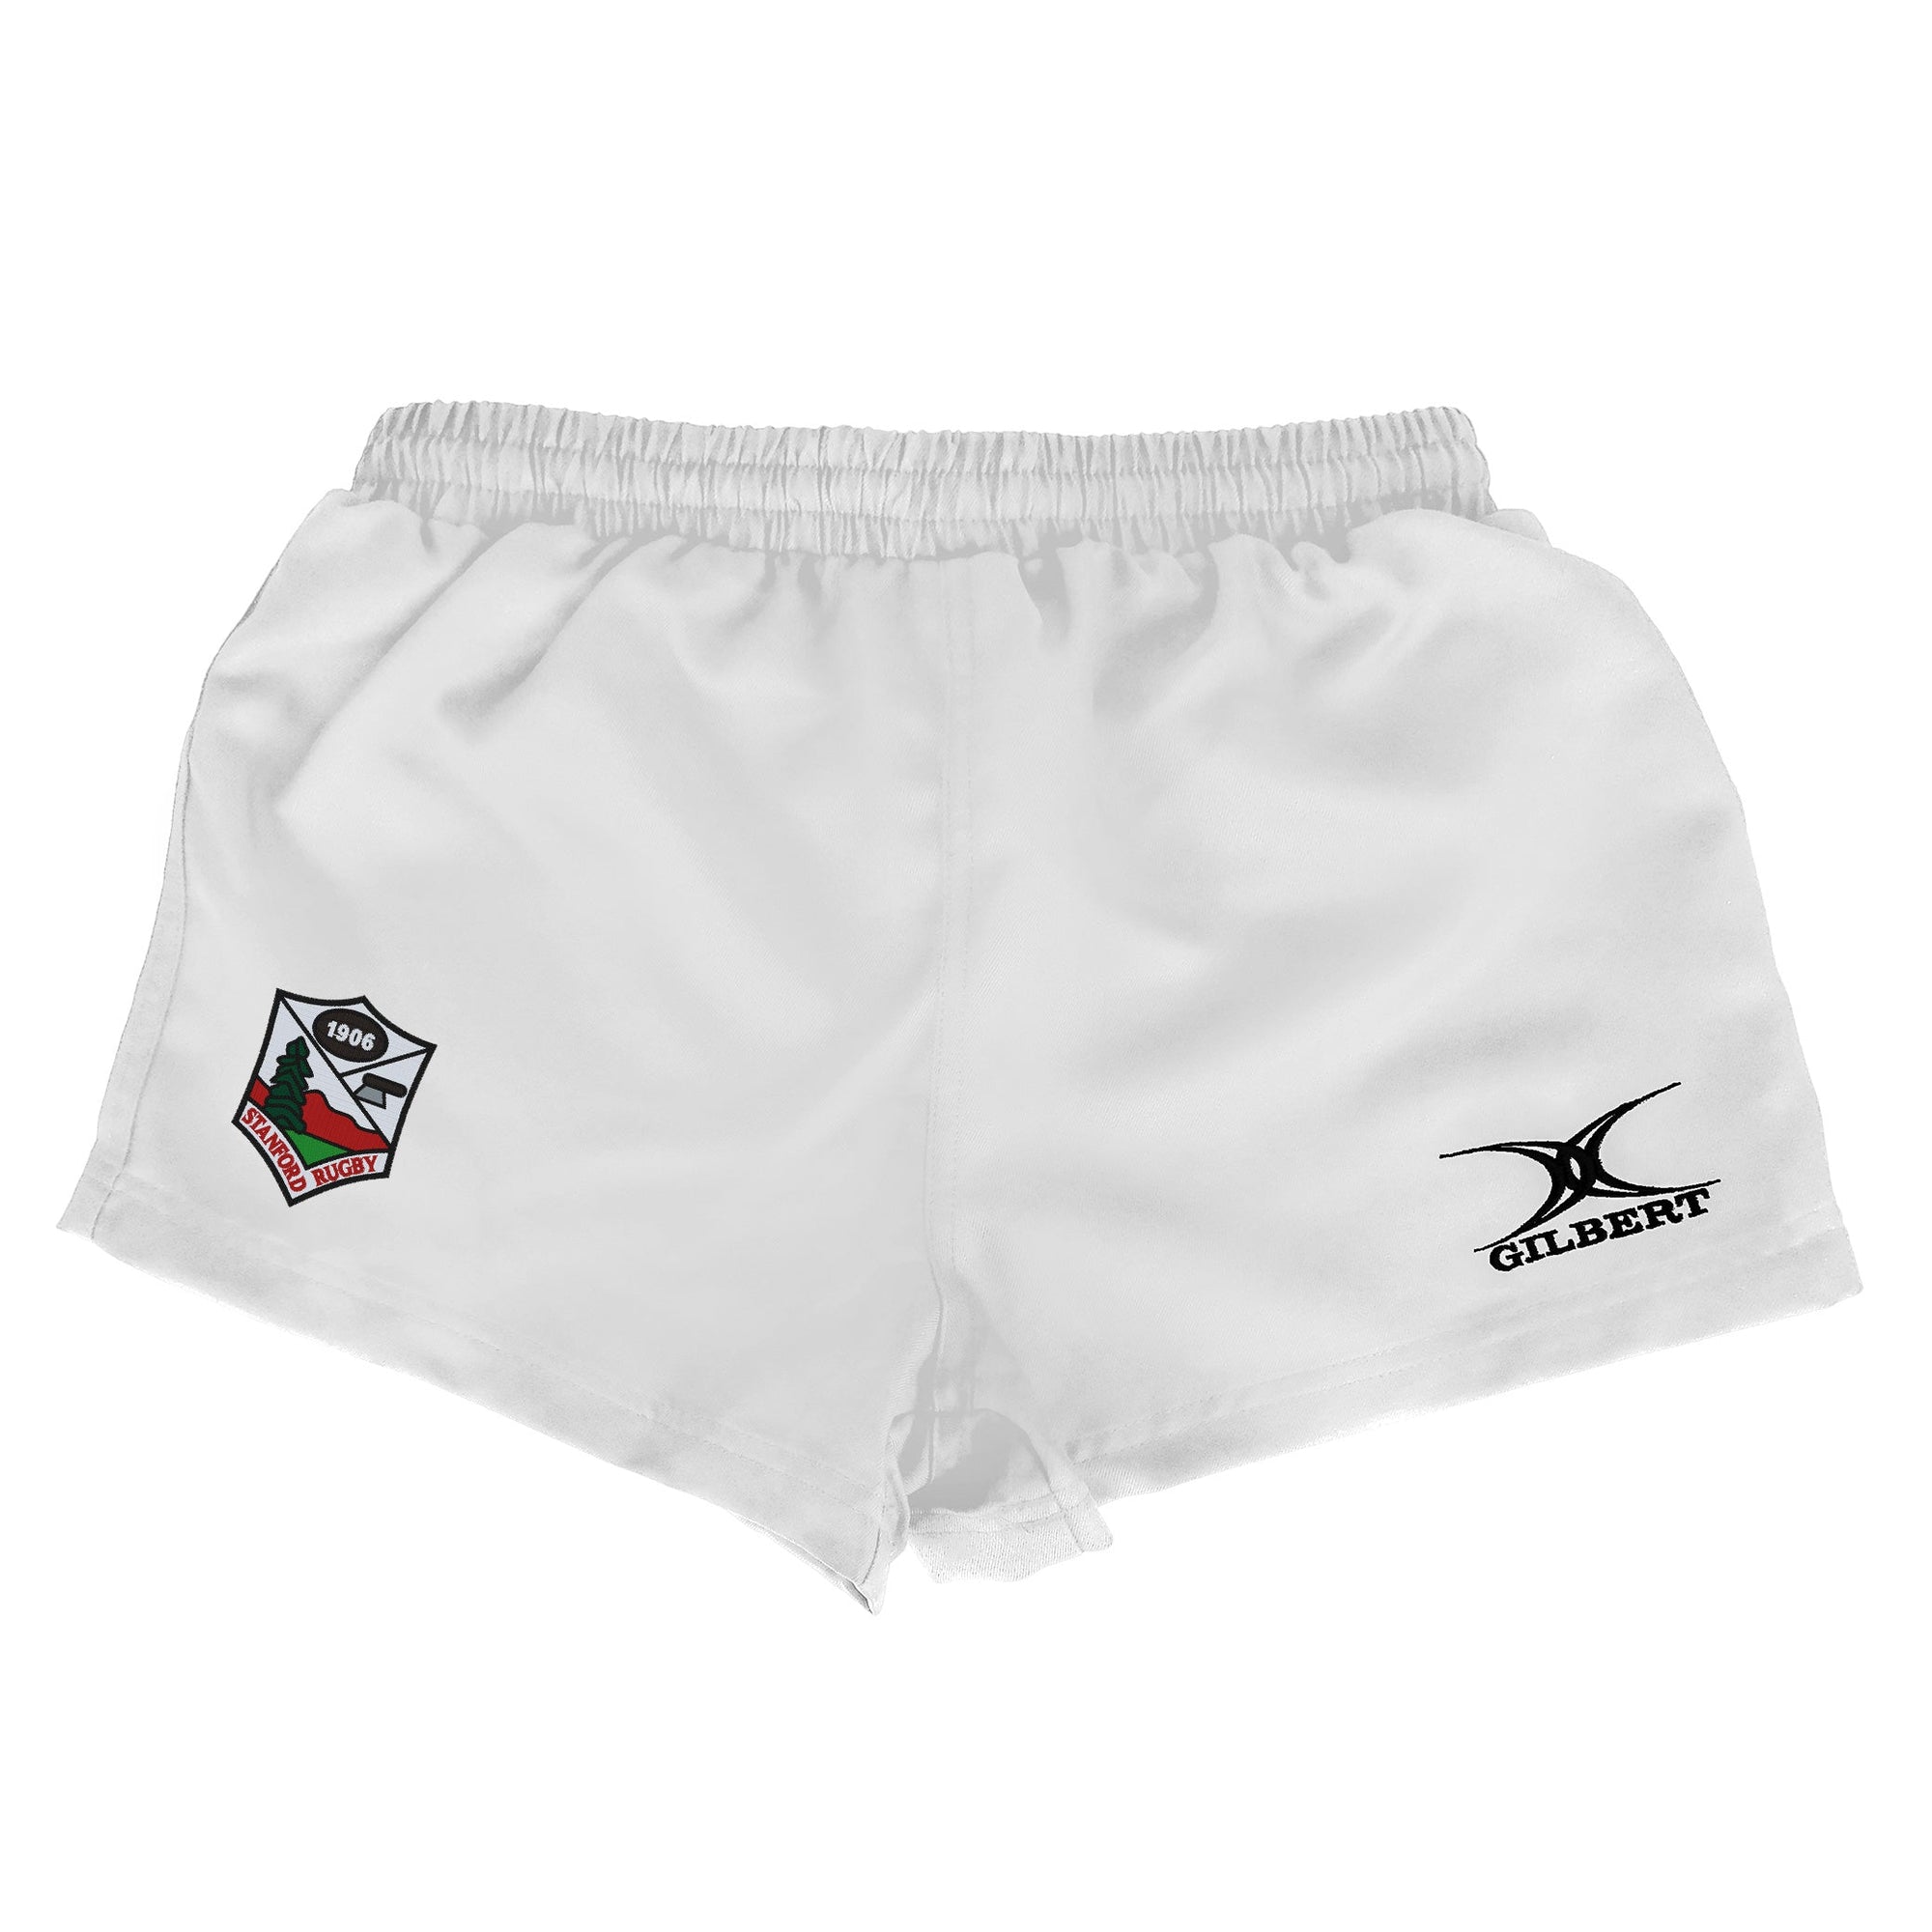 Rugby Imports Stanford Rugby Saracen Rugby Shorts